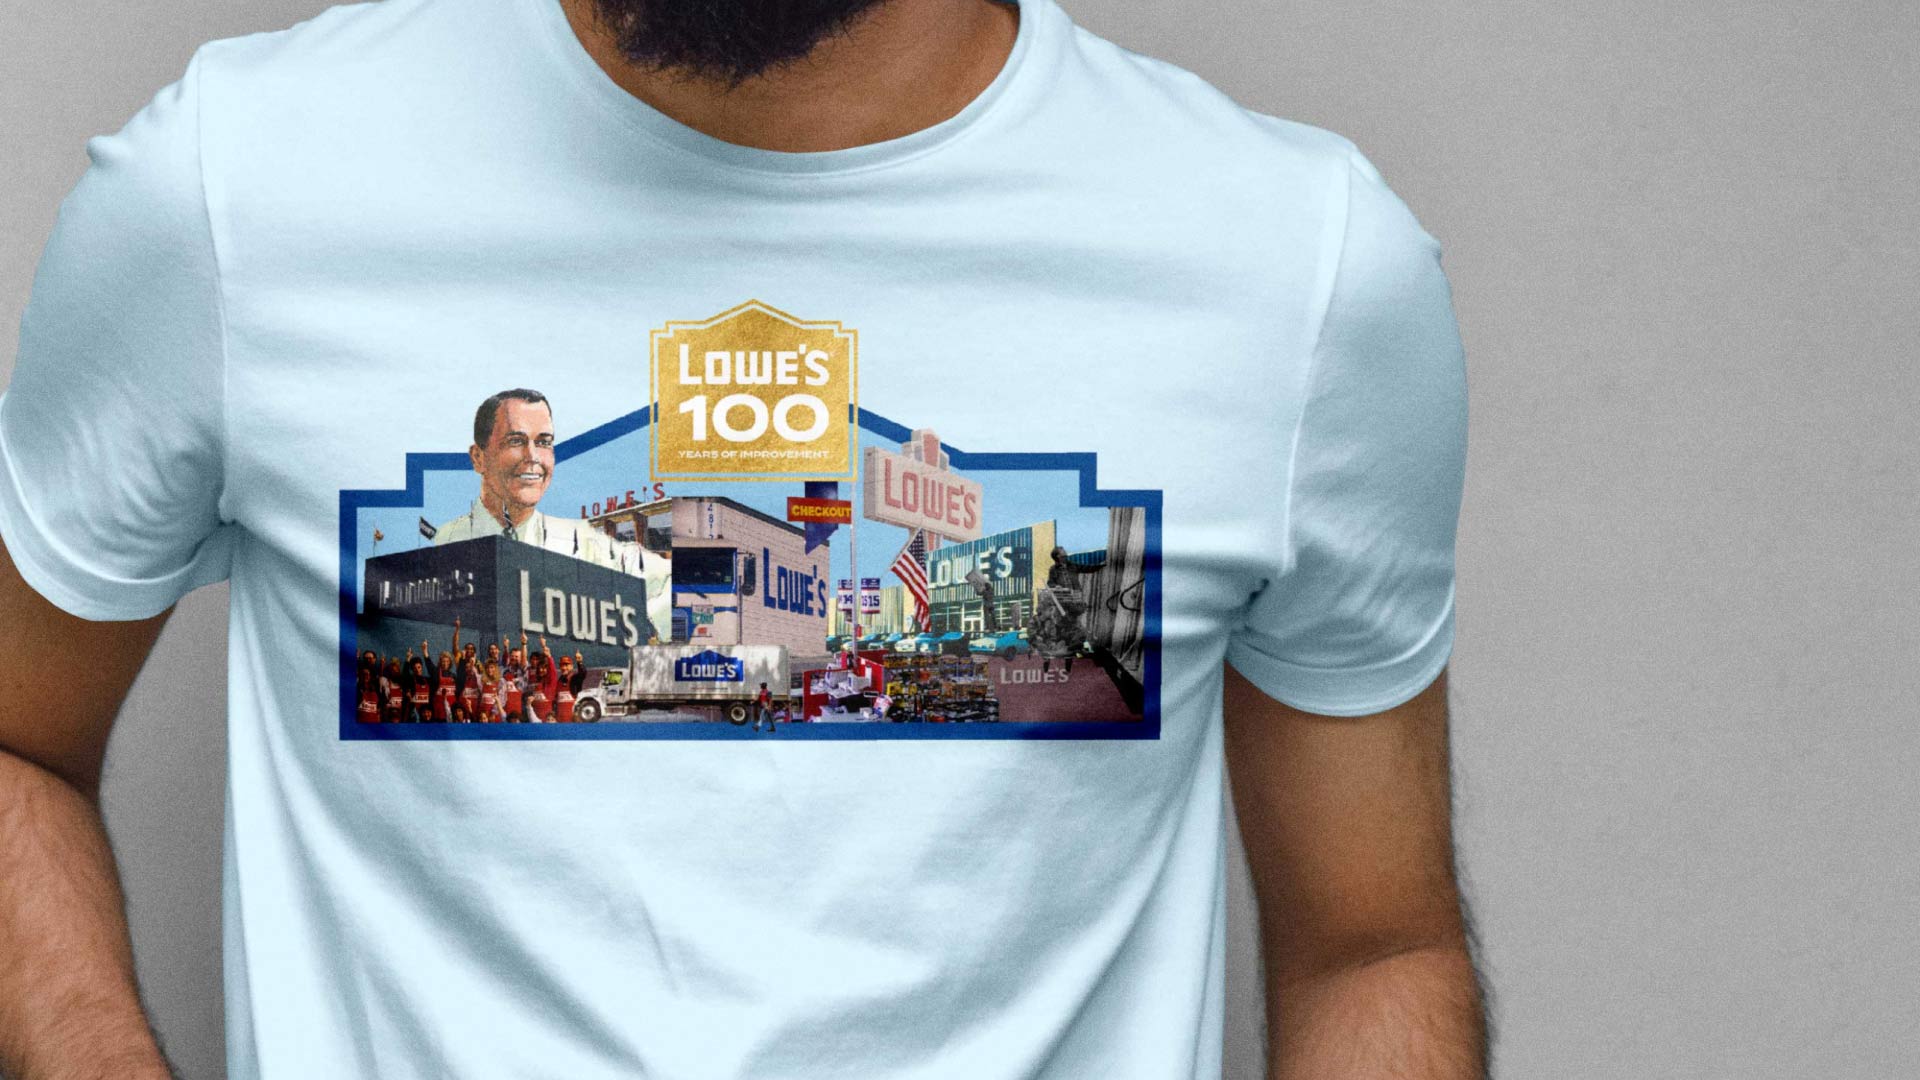 Man with a light blue shirt on showcasing the Lowe's 100 graphic